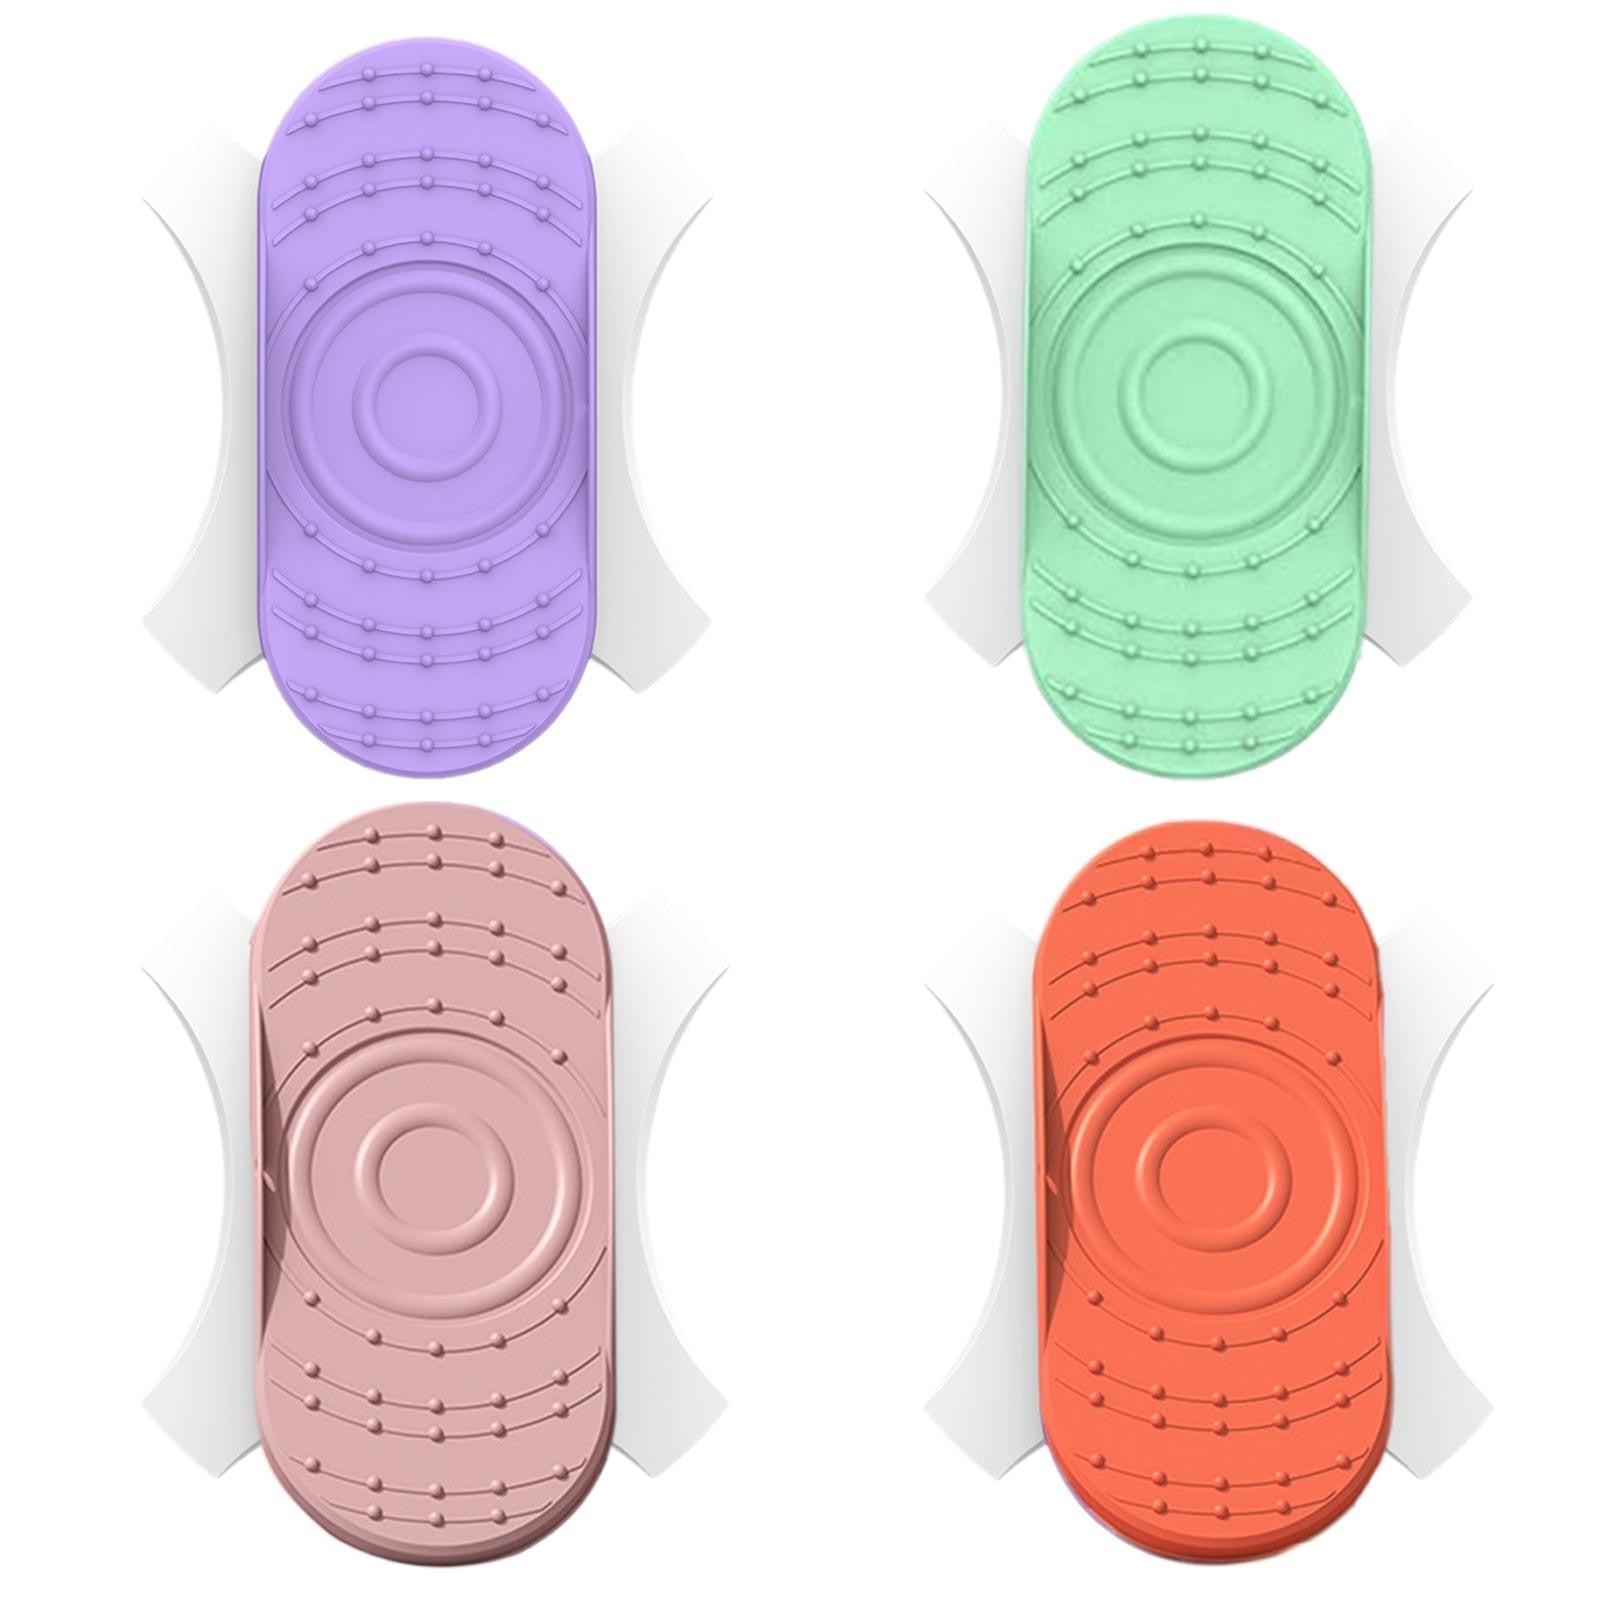 Twister Board - Waist Twisting Disc Pilates and Yoga Equipment - Workout Twist Board - Personal Hour for Yoga and Meditations 